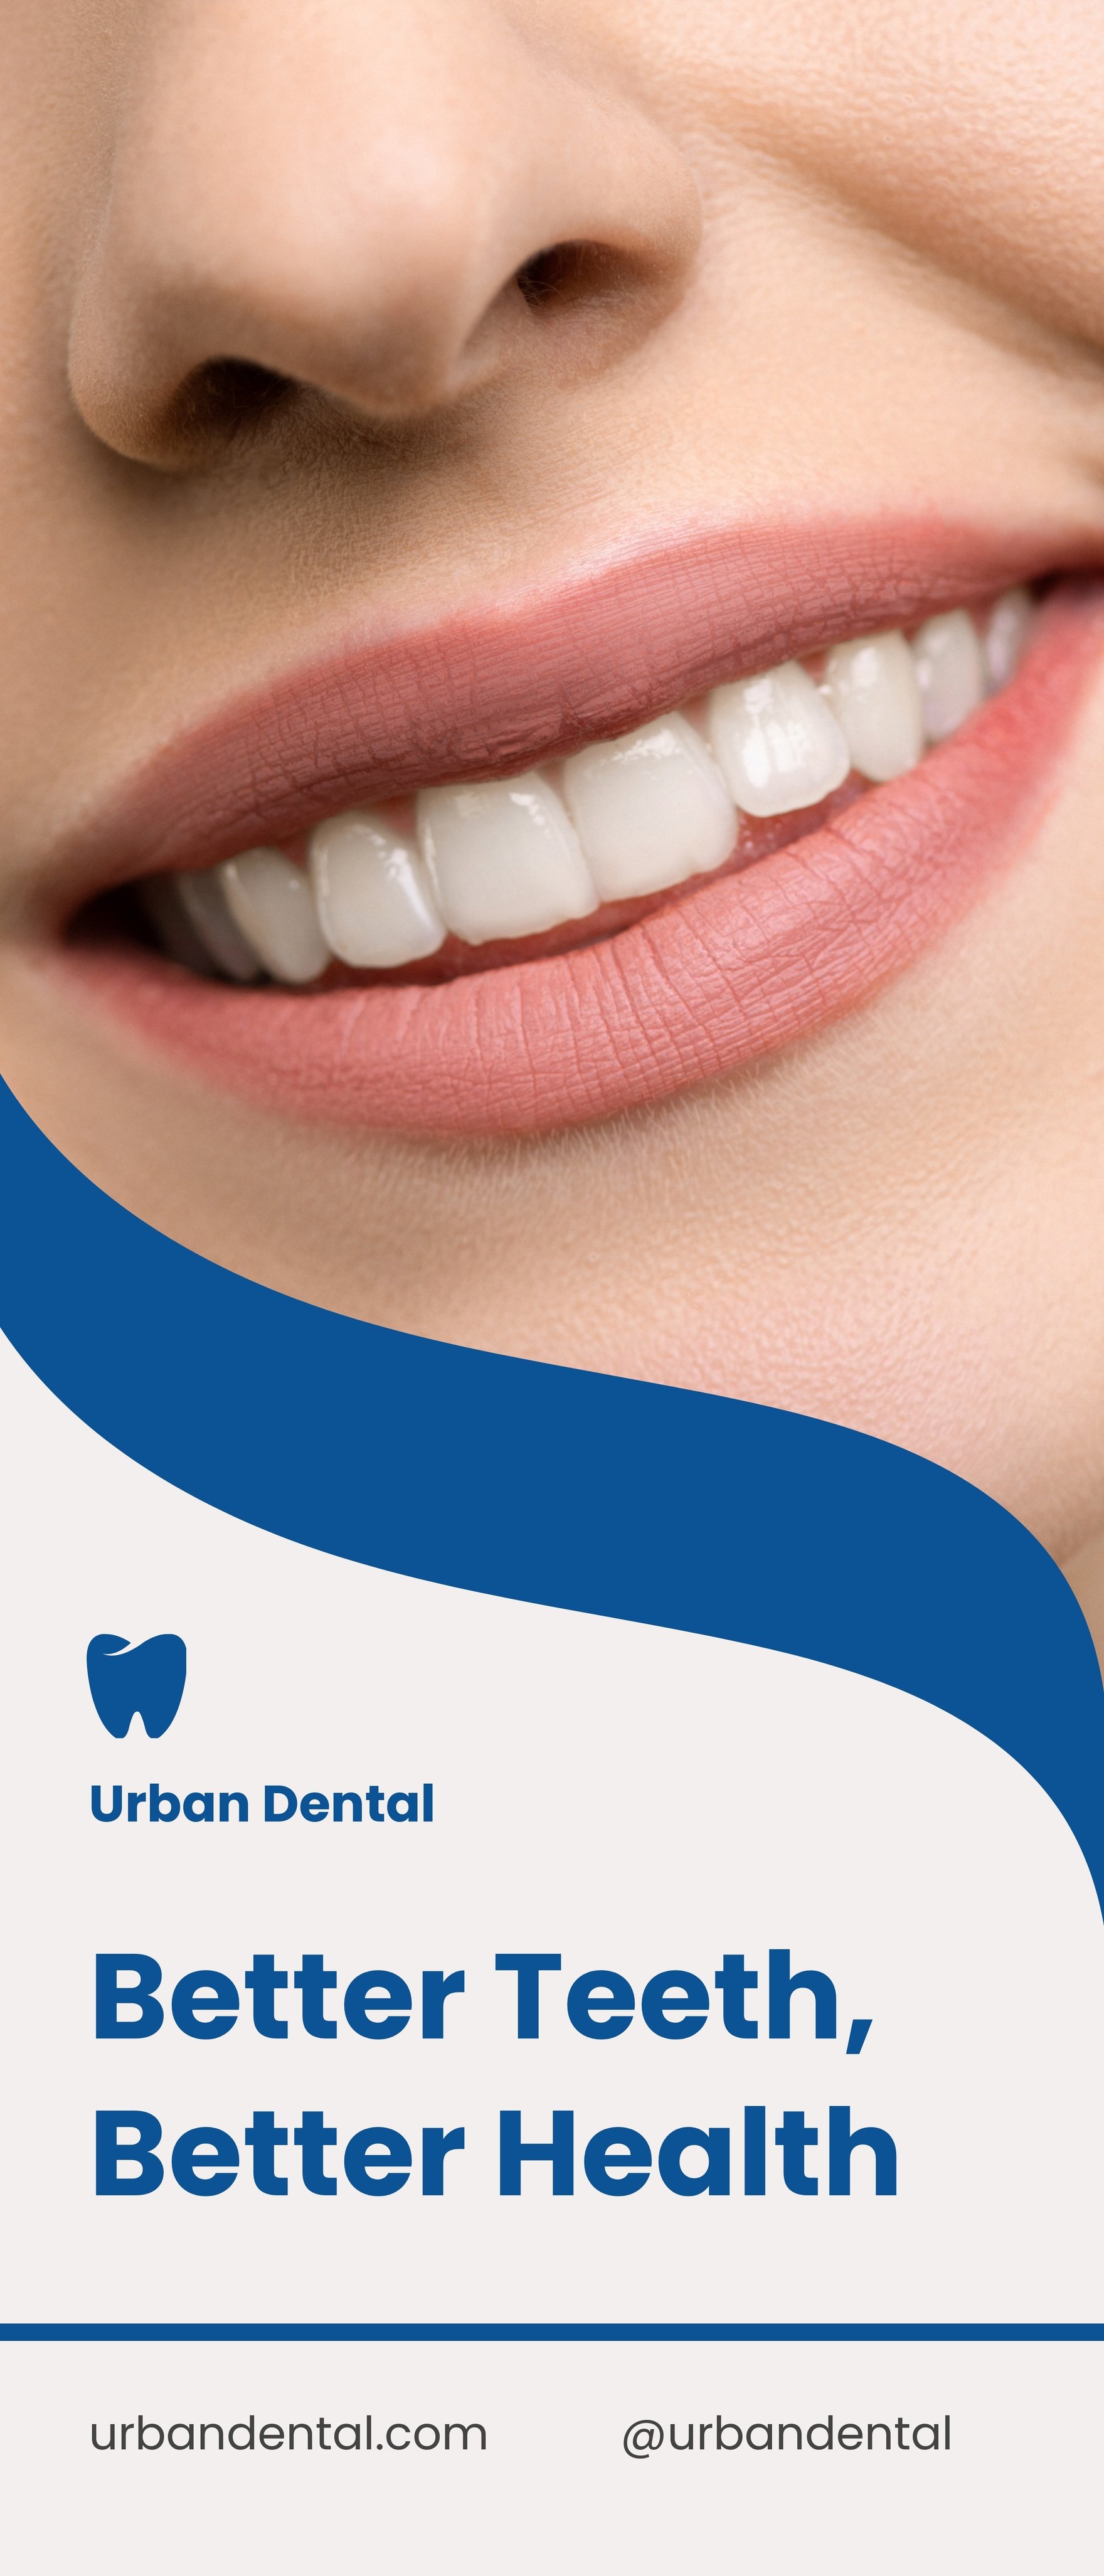 Dental Care Roll Up Banner Template